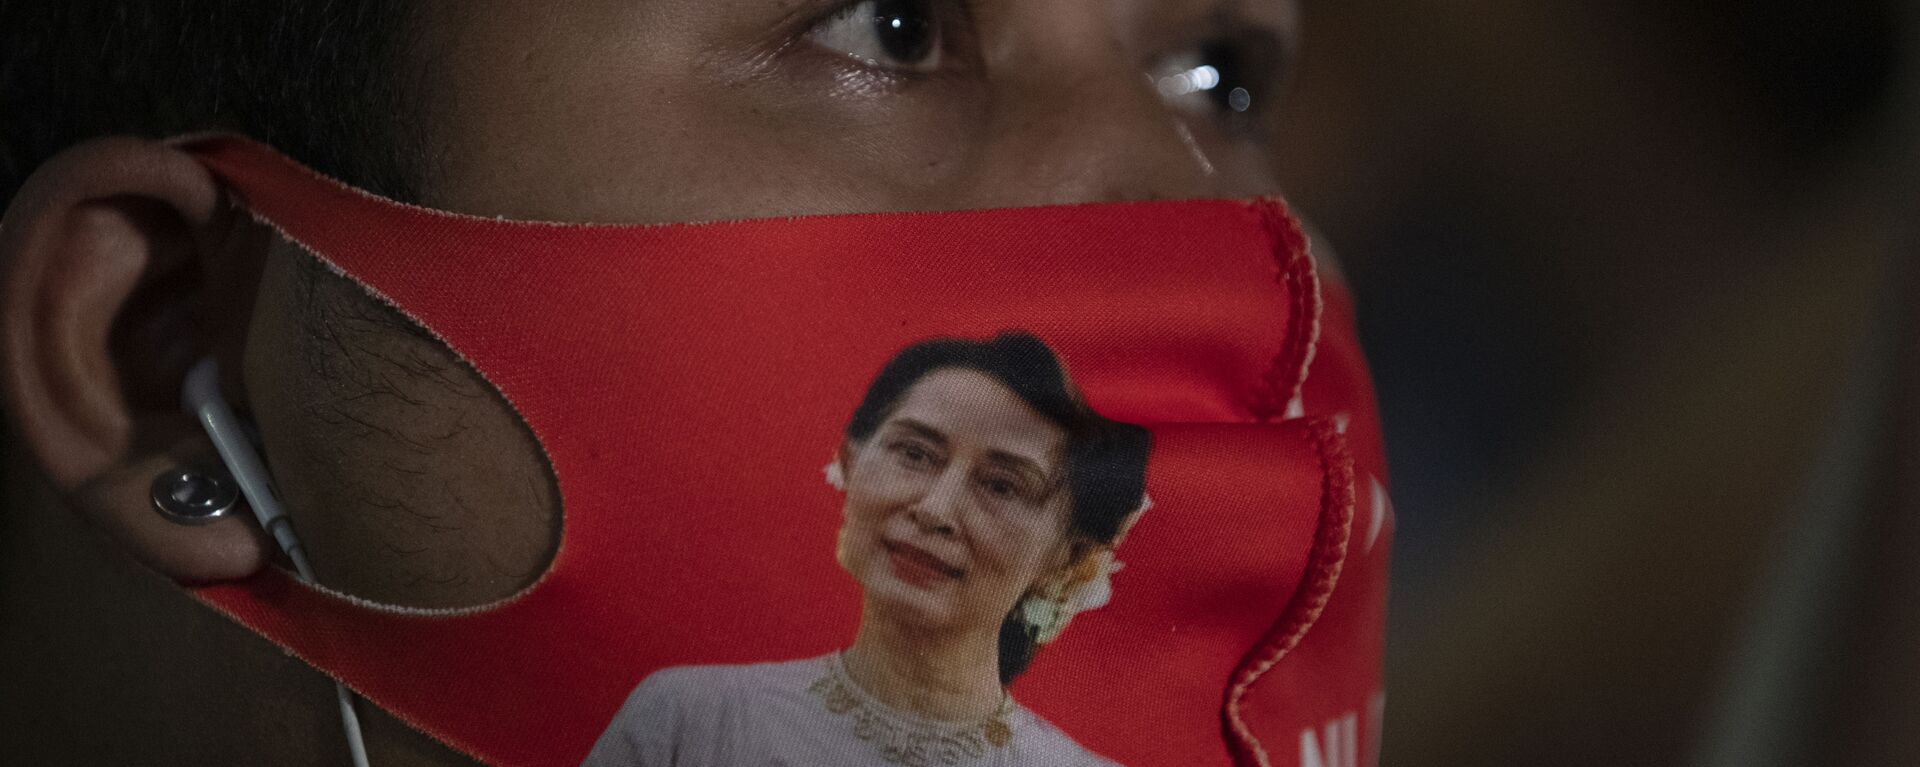 A Myanmar national living in Thailand wears a face mask with the image of Myanmar leader Aung San Suu Kyi during a protest in front of Myanmar Embassy in Bangkok, Thailand, Thursday, Feb. 4, 2021. The military announced Monday that it will take power for one year, accusing Suu Kyi's government of not investigating allegations of voter fraud in recent elections. Suu Kyi's party swept that vote and the military-backed party did poorly. The state Election Commission has refuted the allegations. - Sputnik International, 1920, 16.02.2021